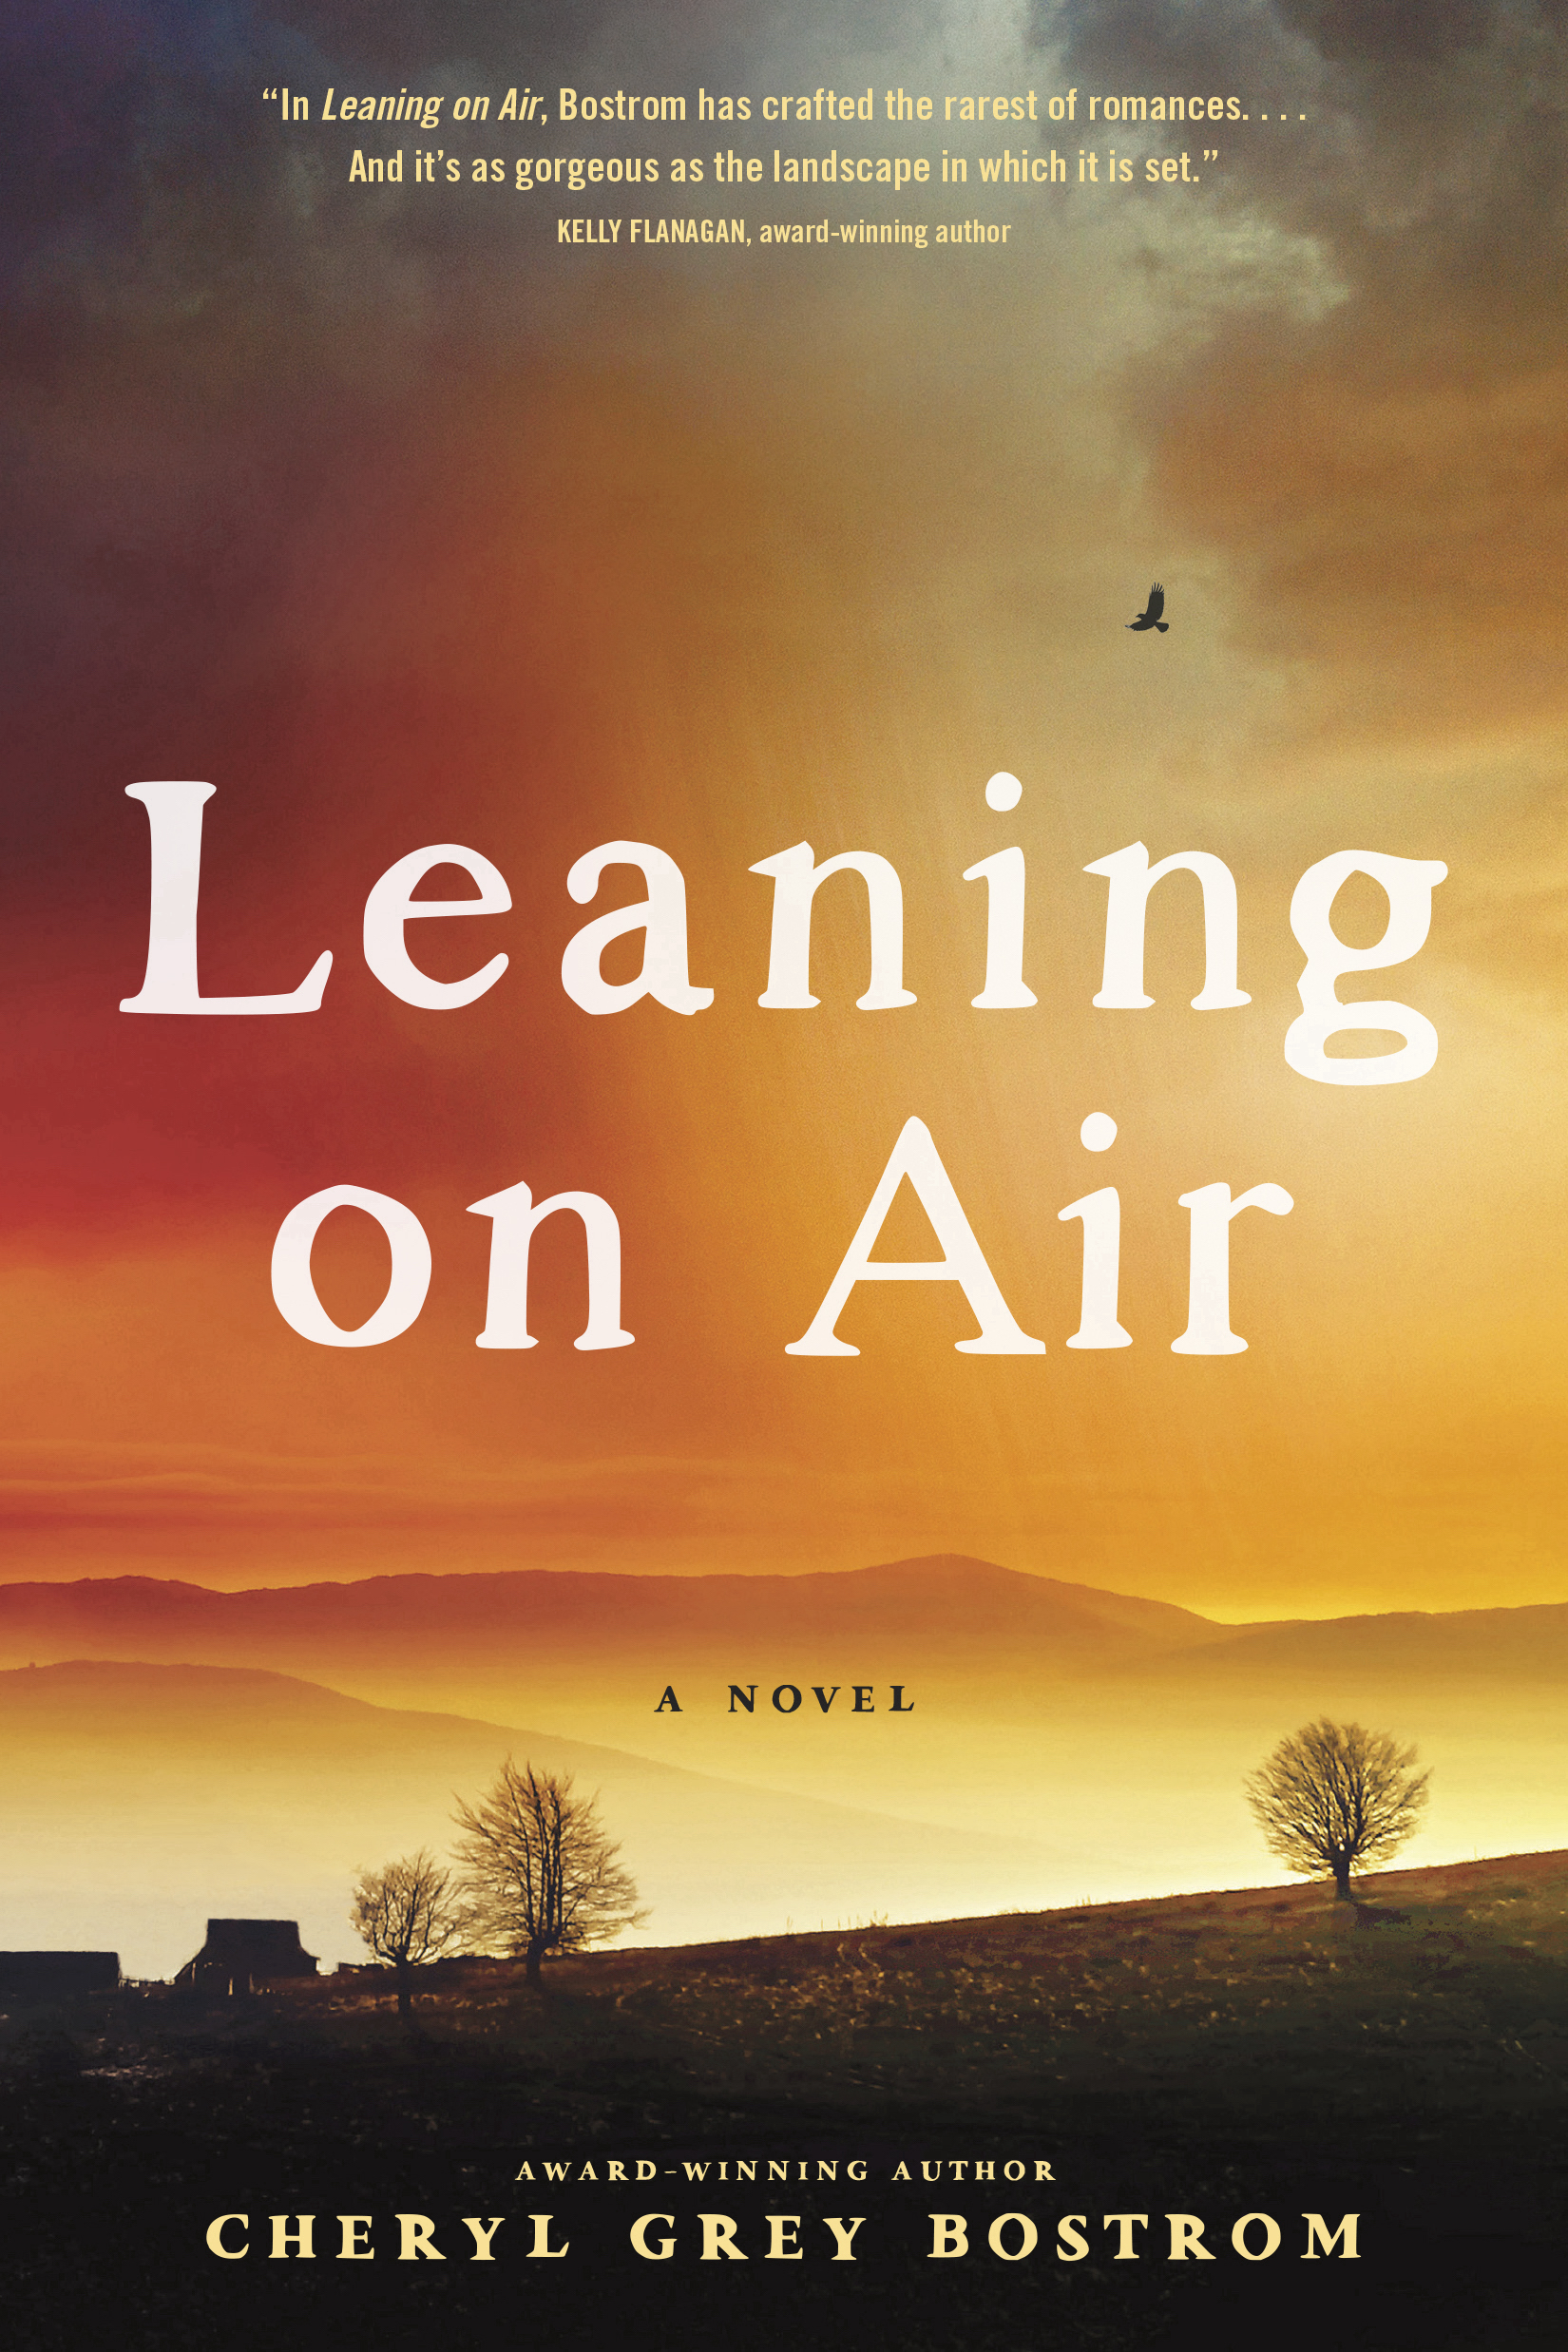 Leaning on Air by Cheryl Bostrom